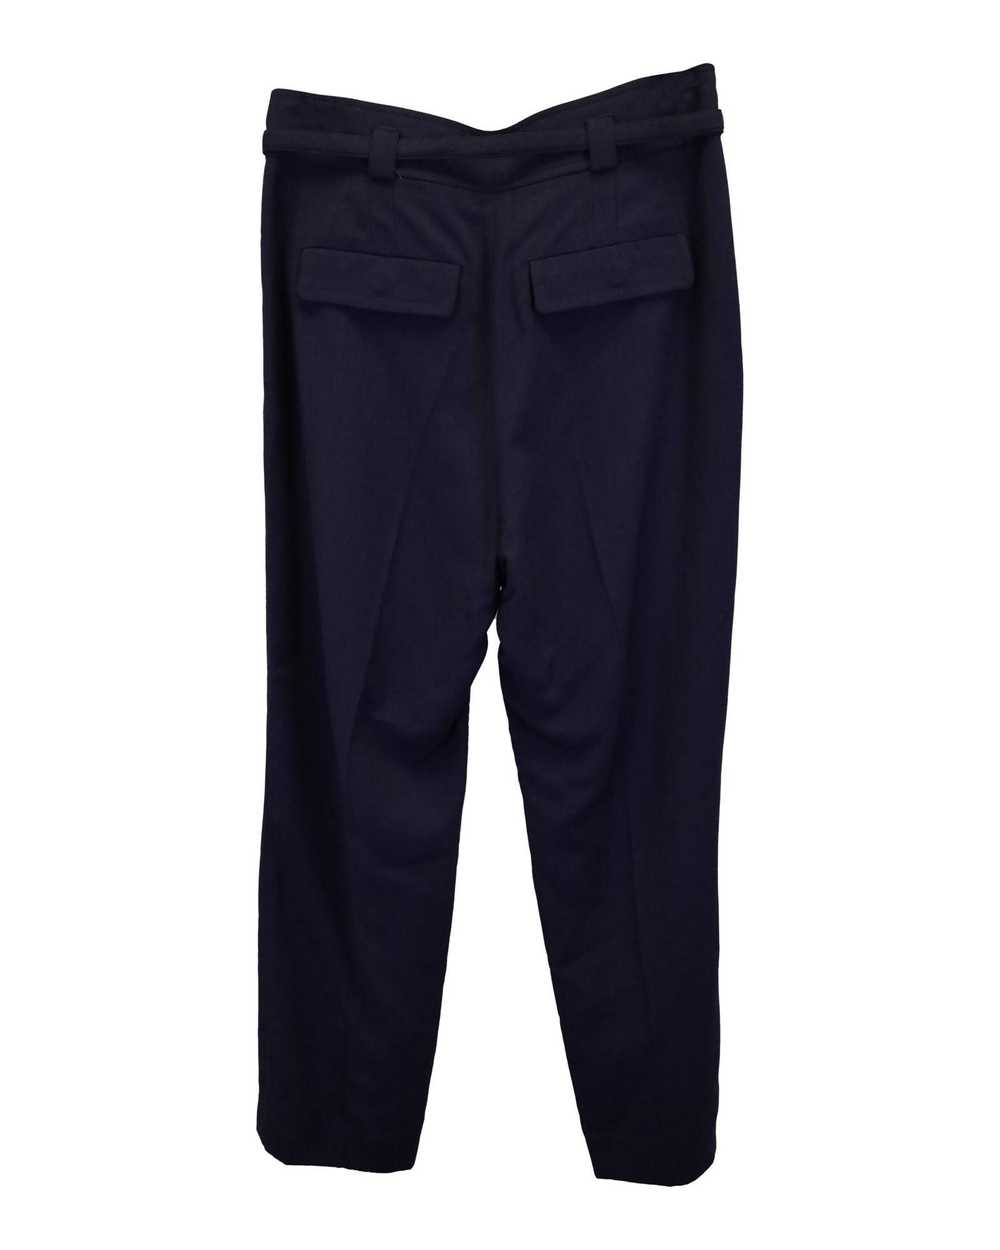 A.P.C. Navy Blue Wool Belted Pleated Trousers APC - image 5